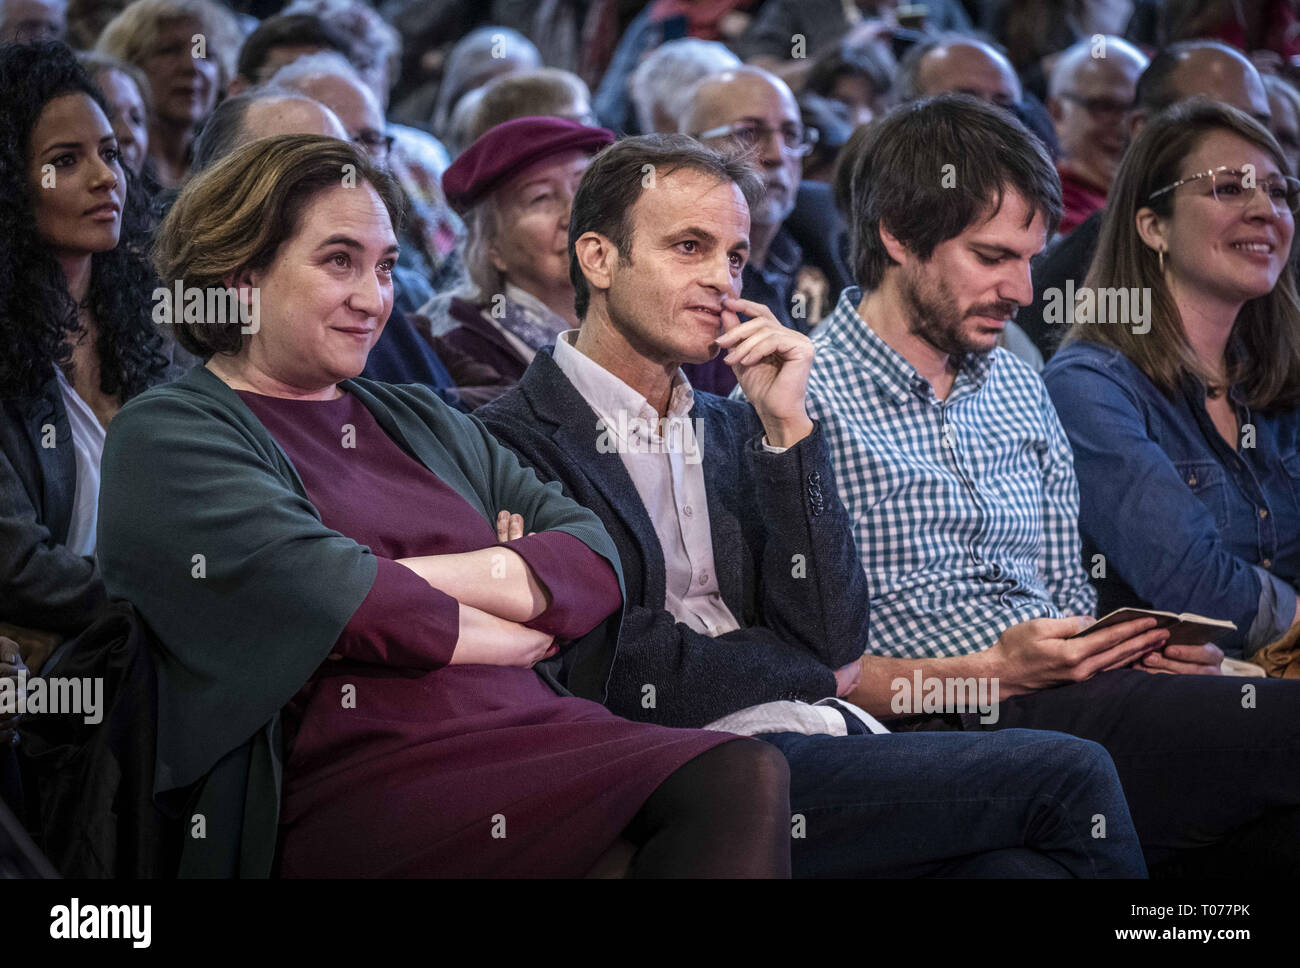 Barcelona, Catalonia, Spain. 17th Mar, 2019. (L-R) Ada Colau, Jaume Asens, Ernest Urtasum and Janet Sanz are seen in the front row during the event.More than a thousand people have filled the centre of Les Cotxeres in the popular neighbourhood of Sant to support the electoral campaign of Barcelona in ComÃº of which the mayor Ada Colau is head of the list. Credit: Paco Freire/SOPA Images/ZUMA Wire/Alamy Live News Stock Photo